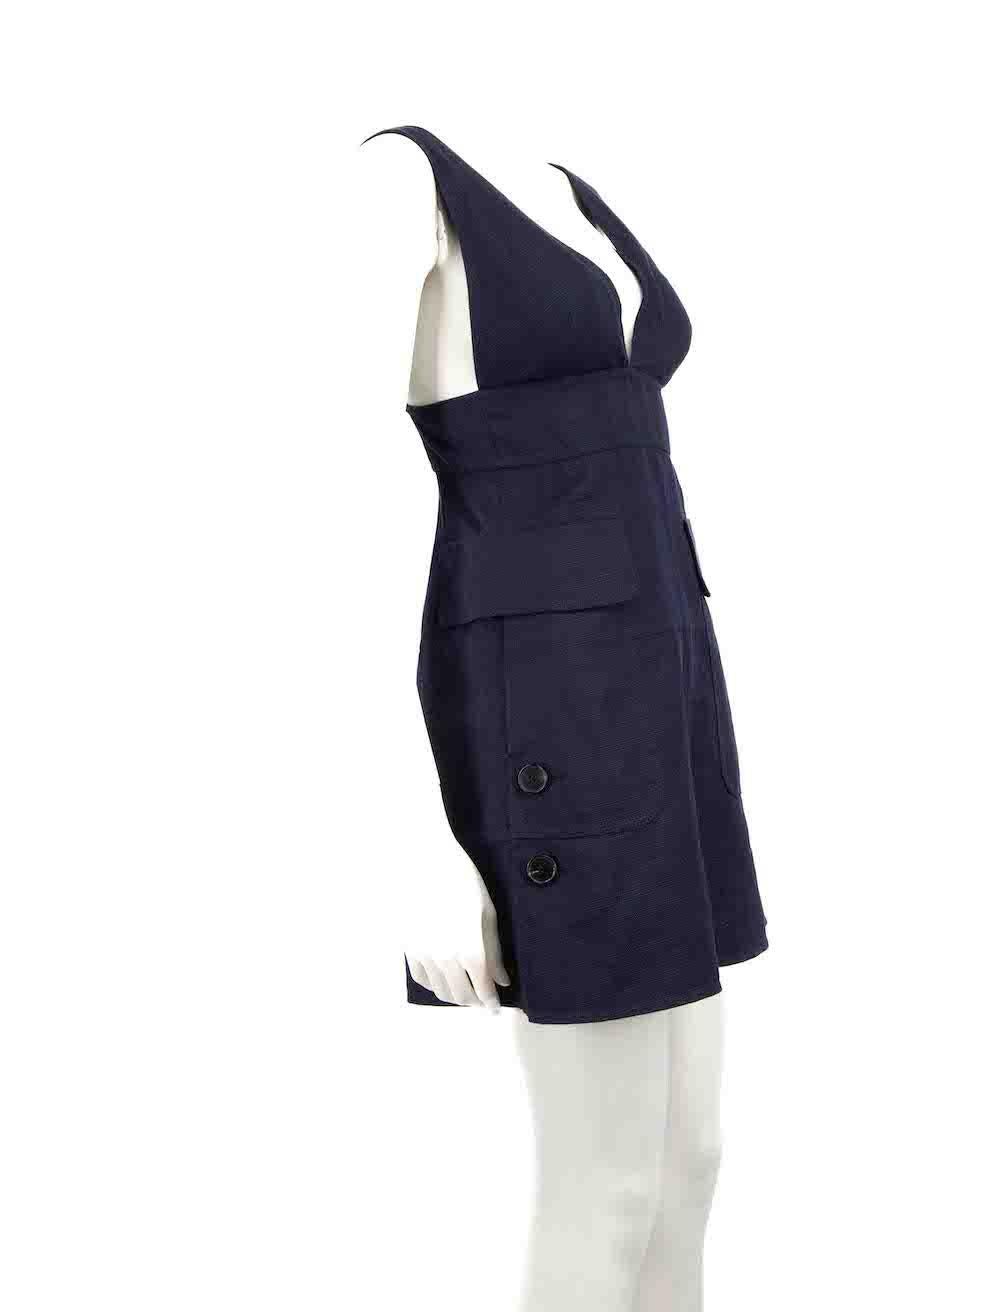 CONDITION is Very good. Minimal wear to dress is evident. Minimal wear to the composition labels at the lining as they have come detached to one side on this used Valentino designer resale item.
 
 Details
 Navy
 Cotton
 Dress
 Plunge neck
 Mini
